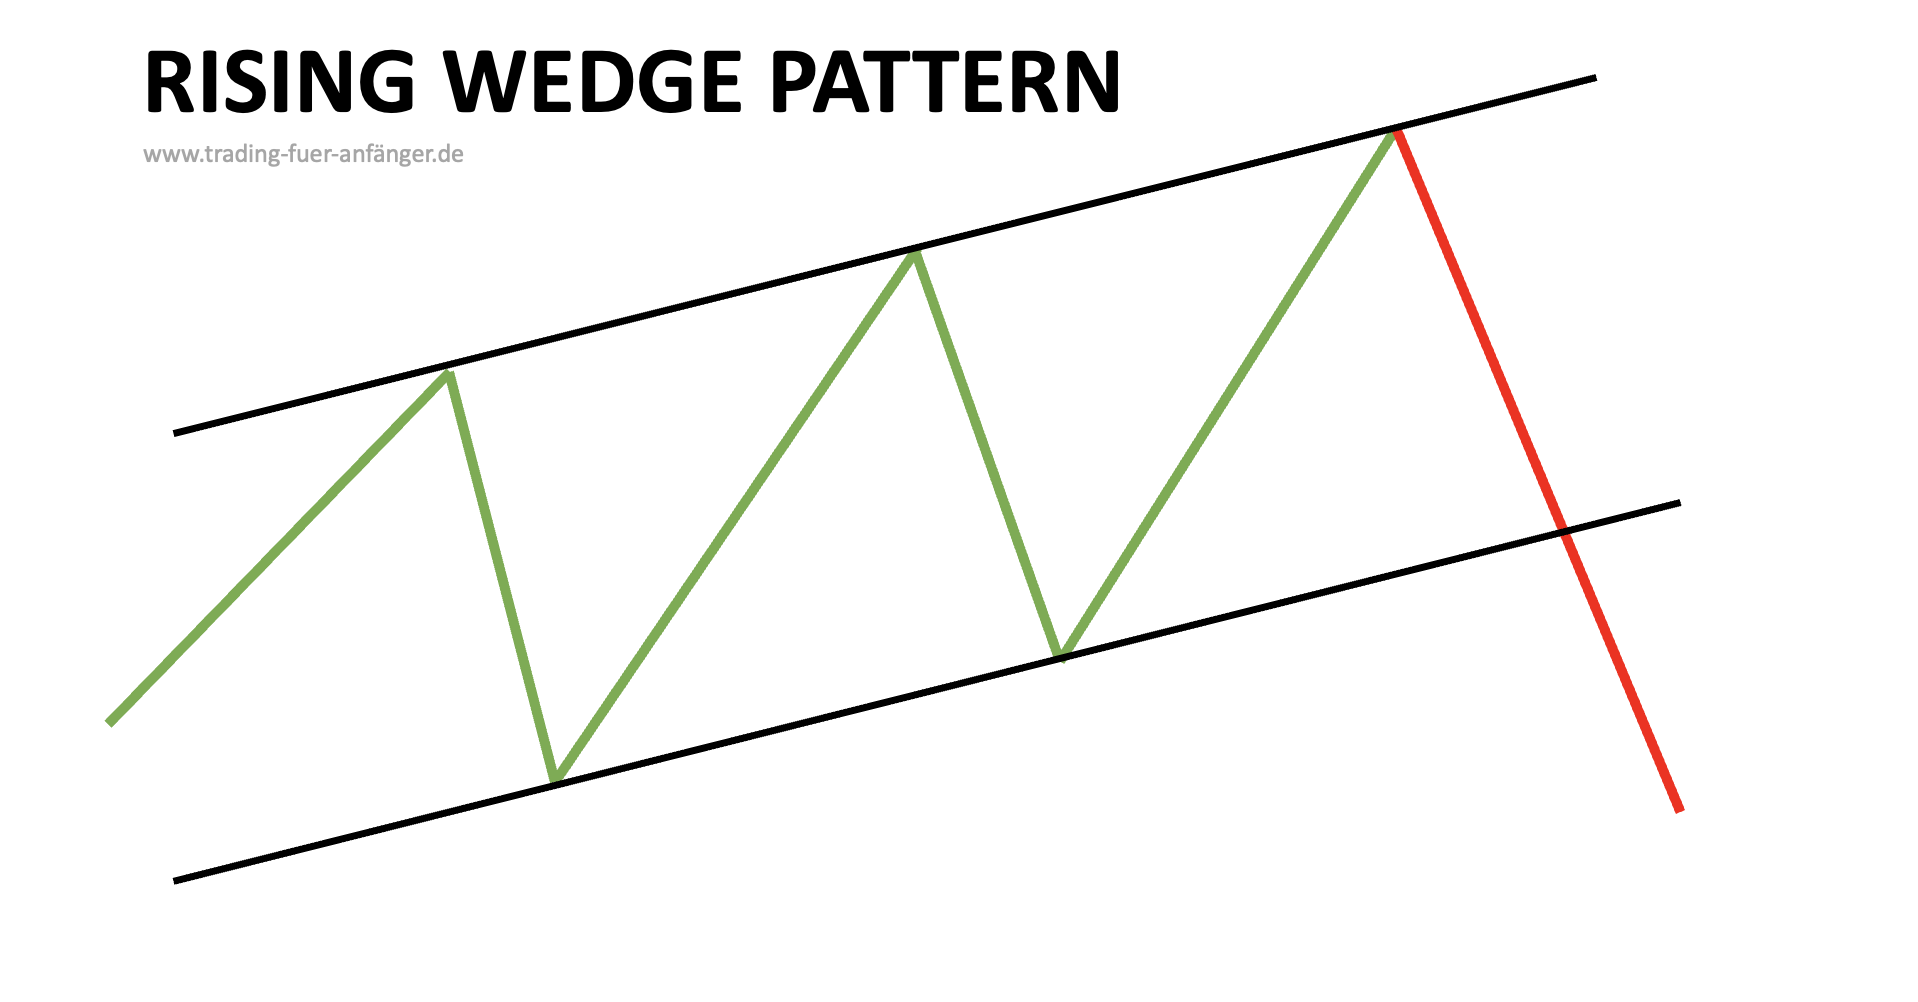 Rising Wedge Pattern Formation